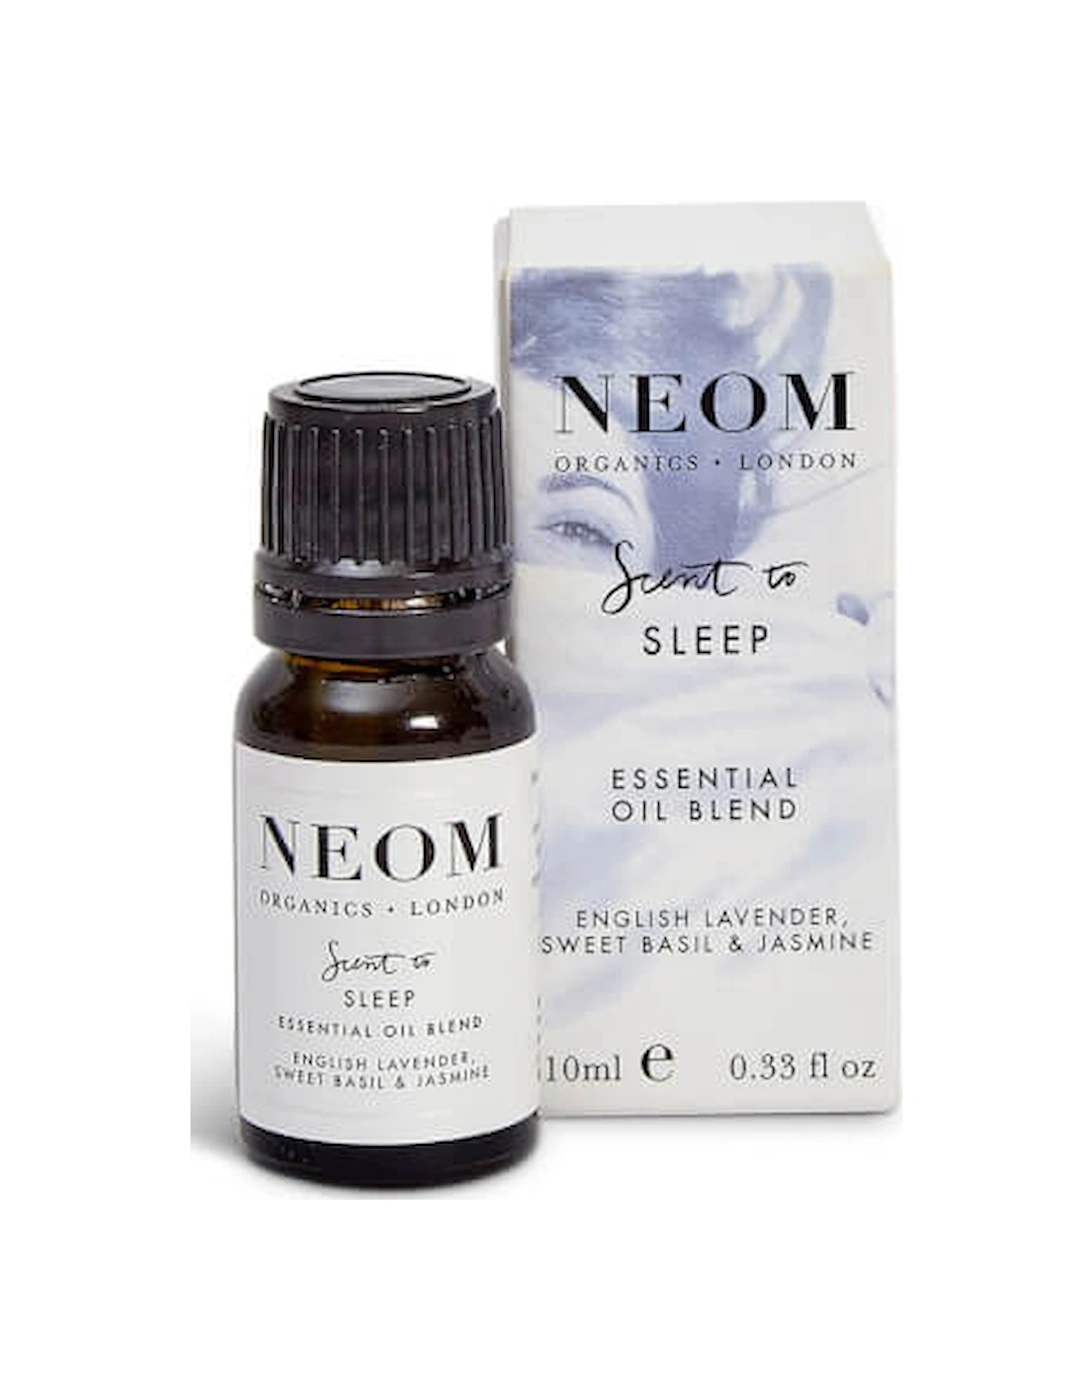 Scent to Sleep Essential Oil Blend 10ml, 2 of 1